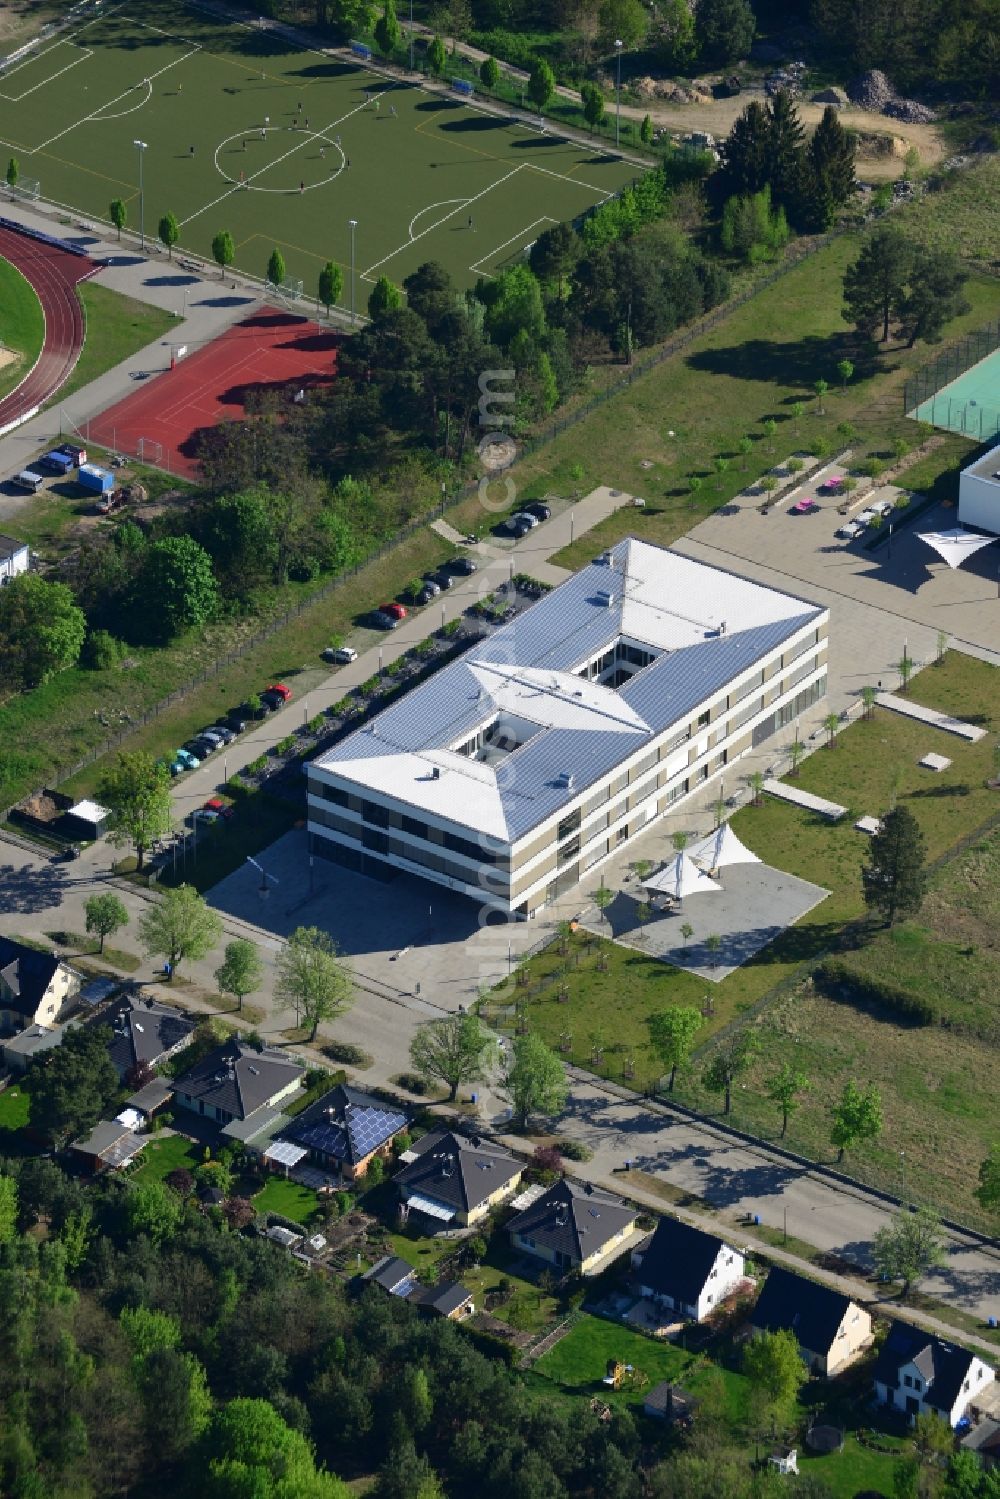 Aerial image Stahnsdorf - Vicco-von-Buelow High School in Stahnsdorf in the state of Brandenburg. The school and its compound is surrounded by meadows, lawns and woods and consists of a main and a side building as well as sports facilities